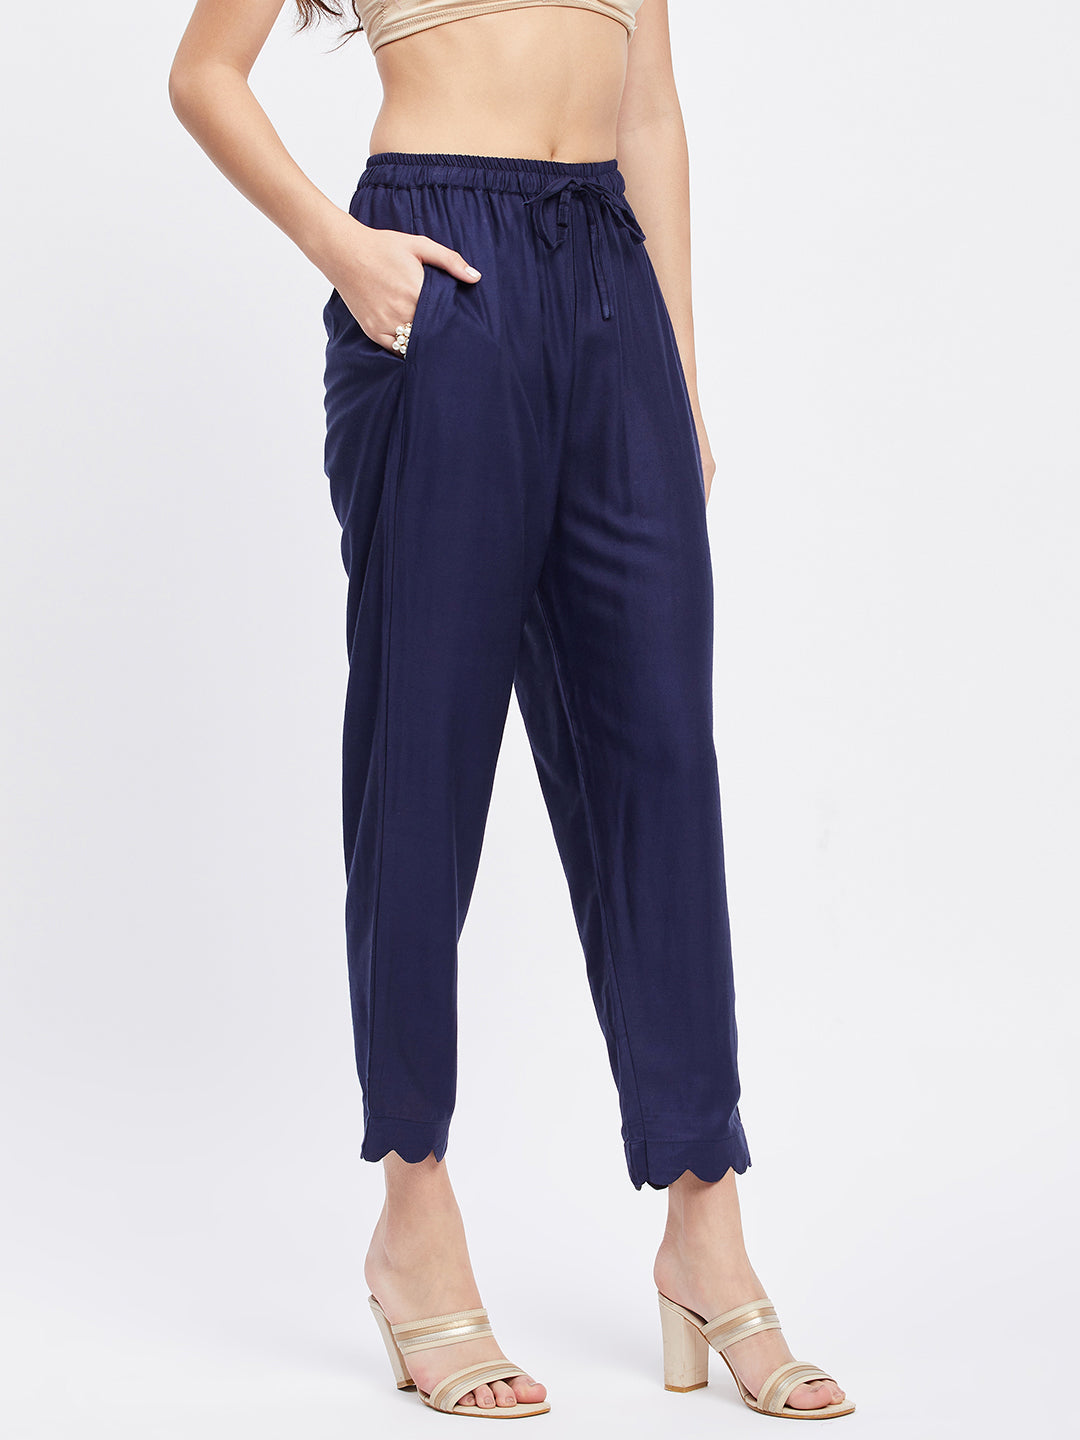 Navy Blue Solid Rayon Straight Palazzo